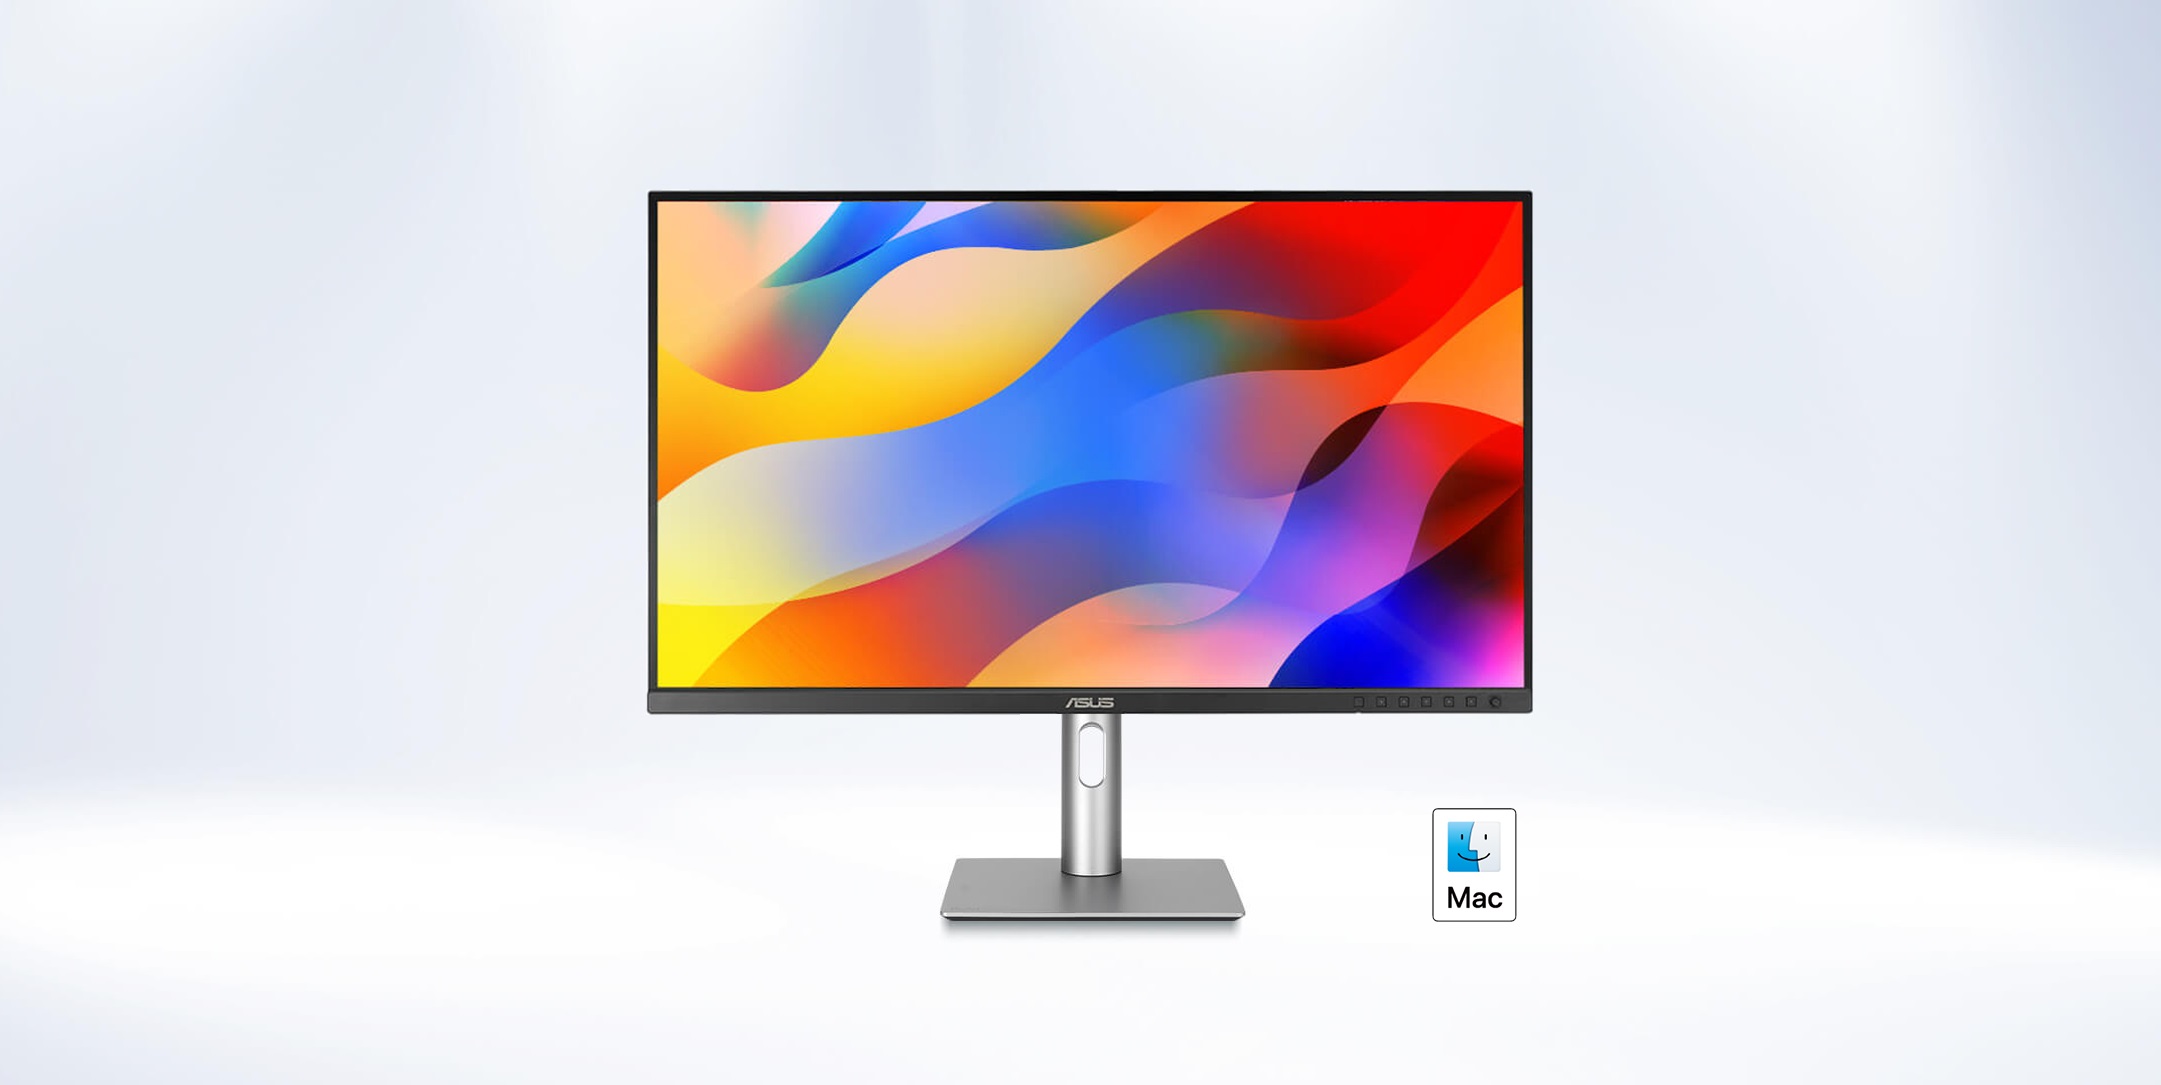 ASUS introduces ProArt Display 4K monitor for digital content